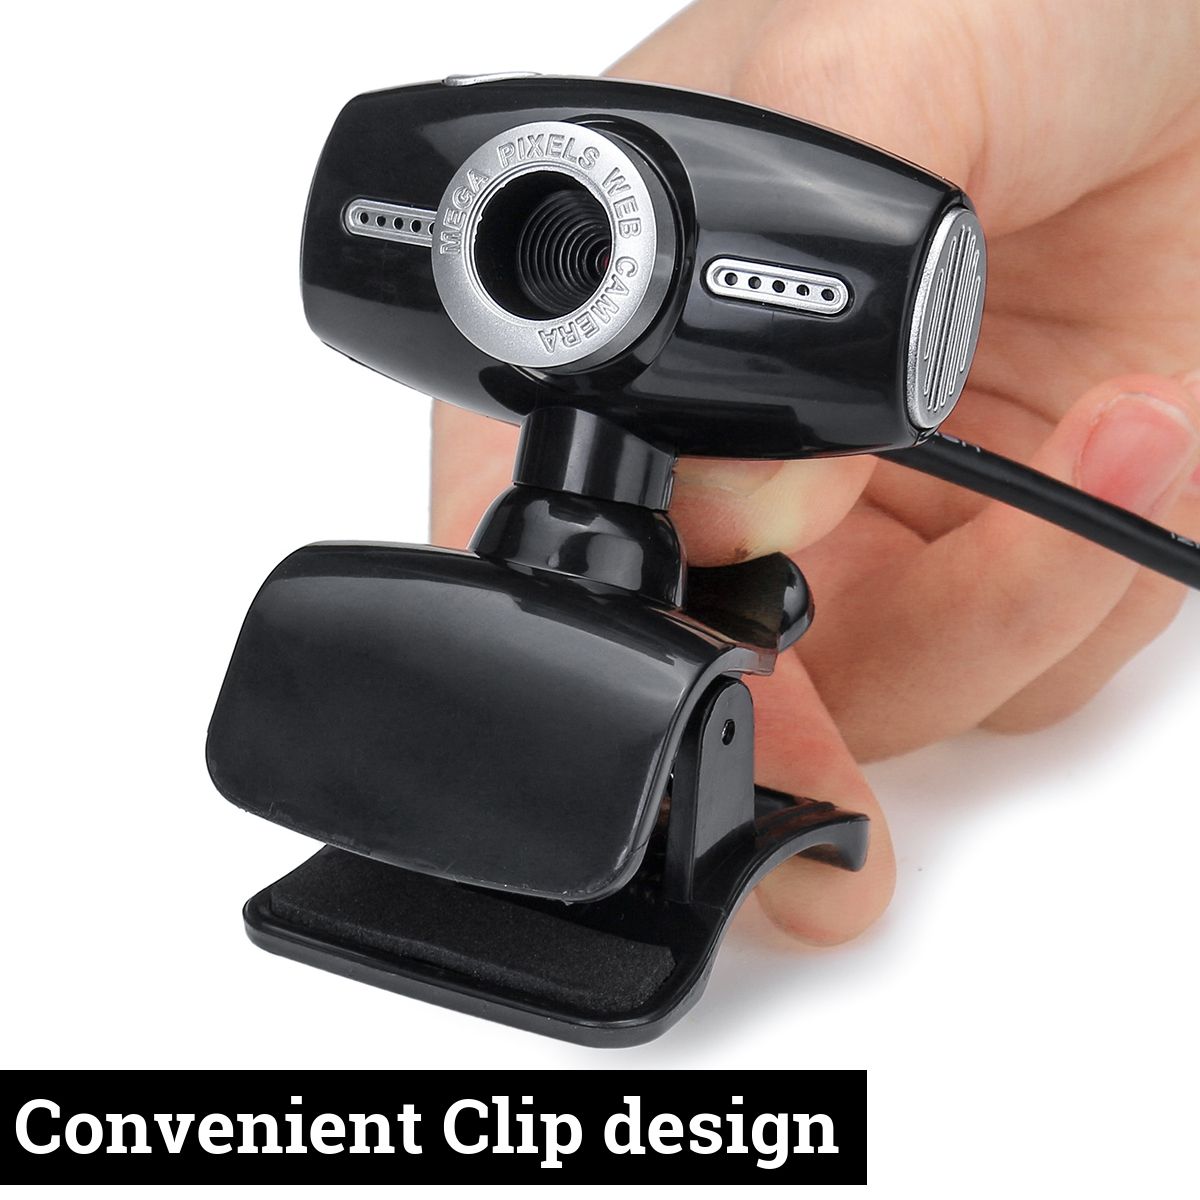 HD-1200P-USB-Webcam-with-Microphone-Recording-Camera-30fps-For-PC-Laptop-Desktop-1675272